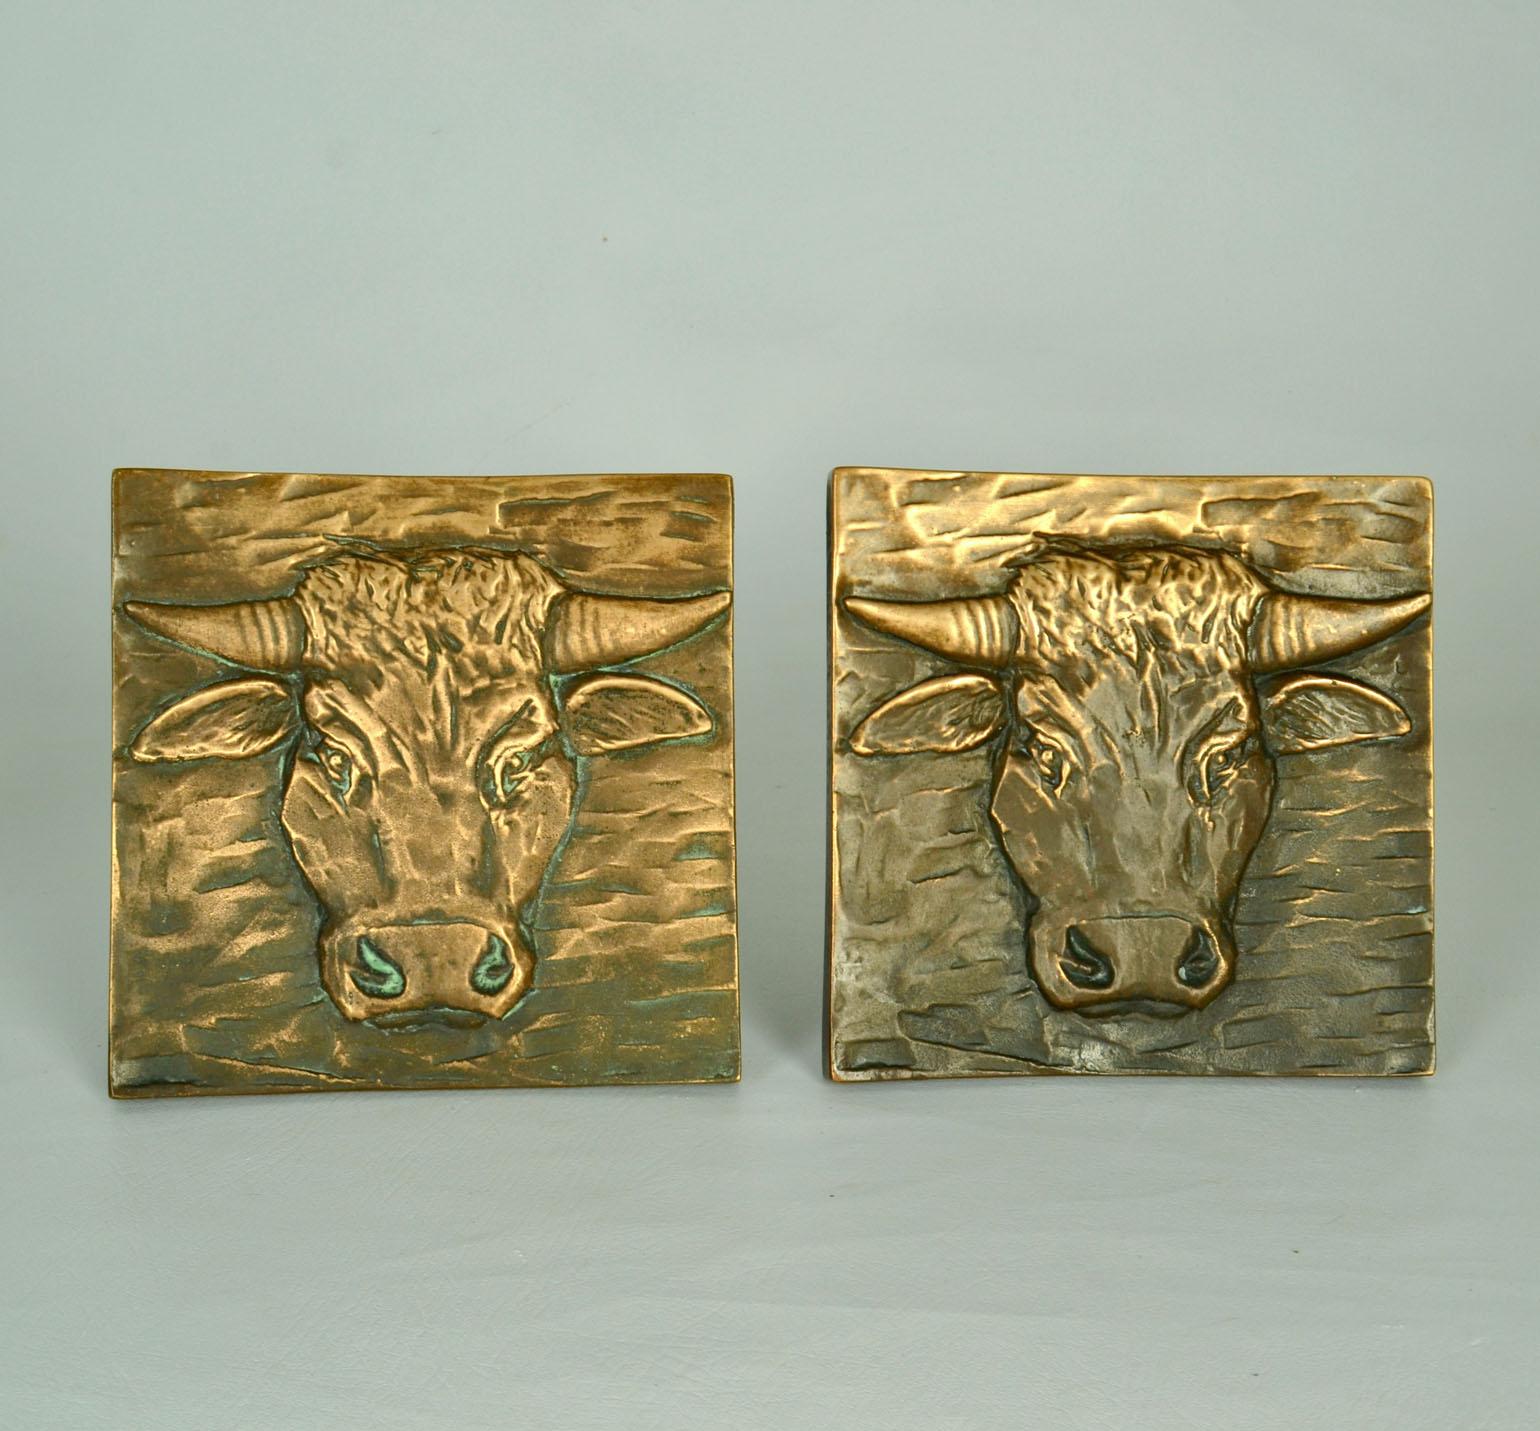 Cast Architectural Bronze Push Pull Pair Door Handles with Bulls for Double Doors For Sale